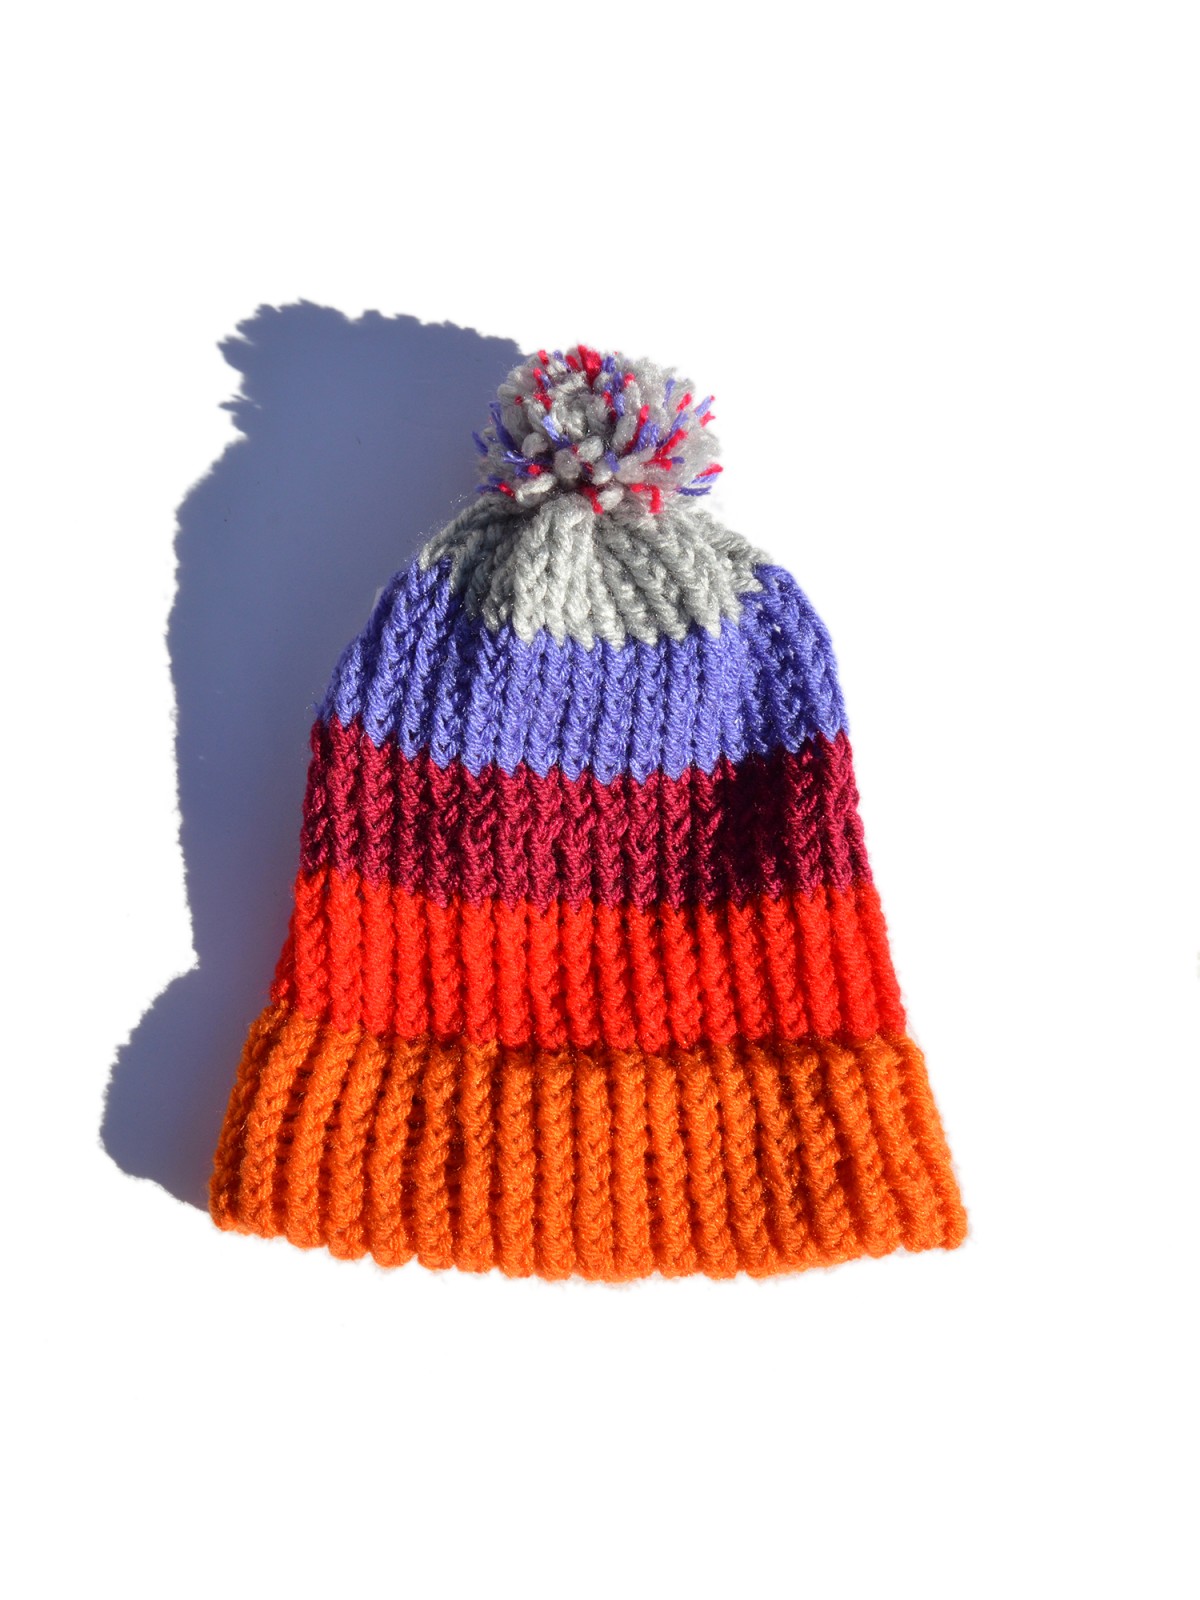 Grey, and San Fabrizzio Hat bordeaux, red orange Beanie Handmade lilac,